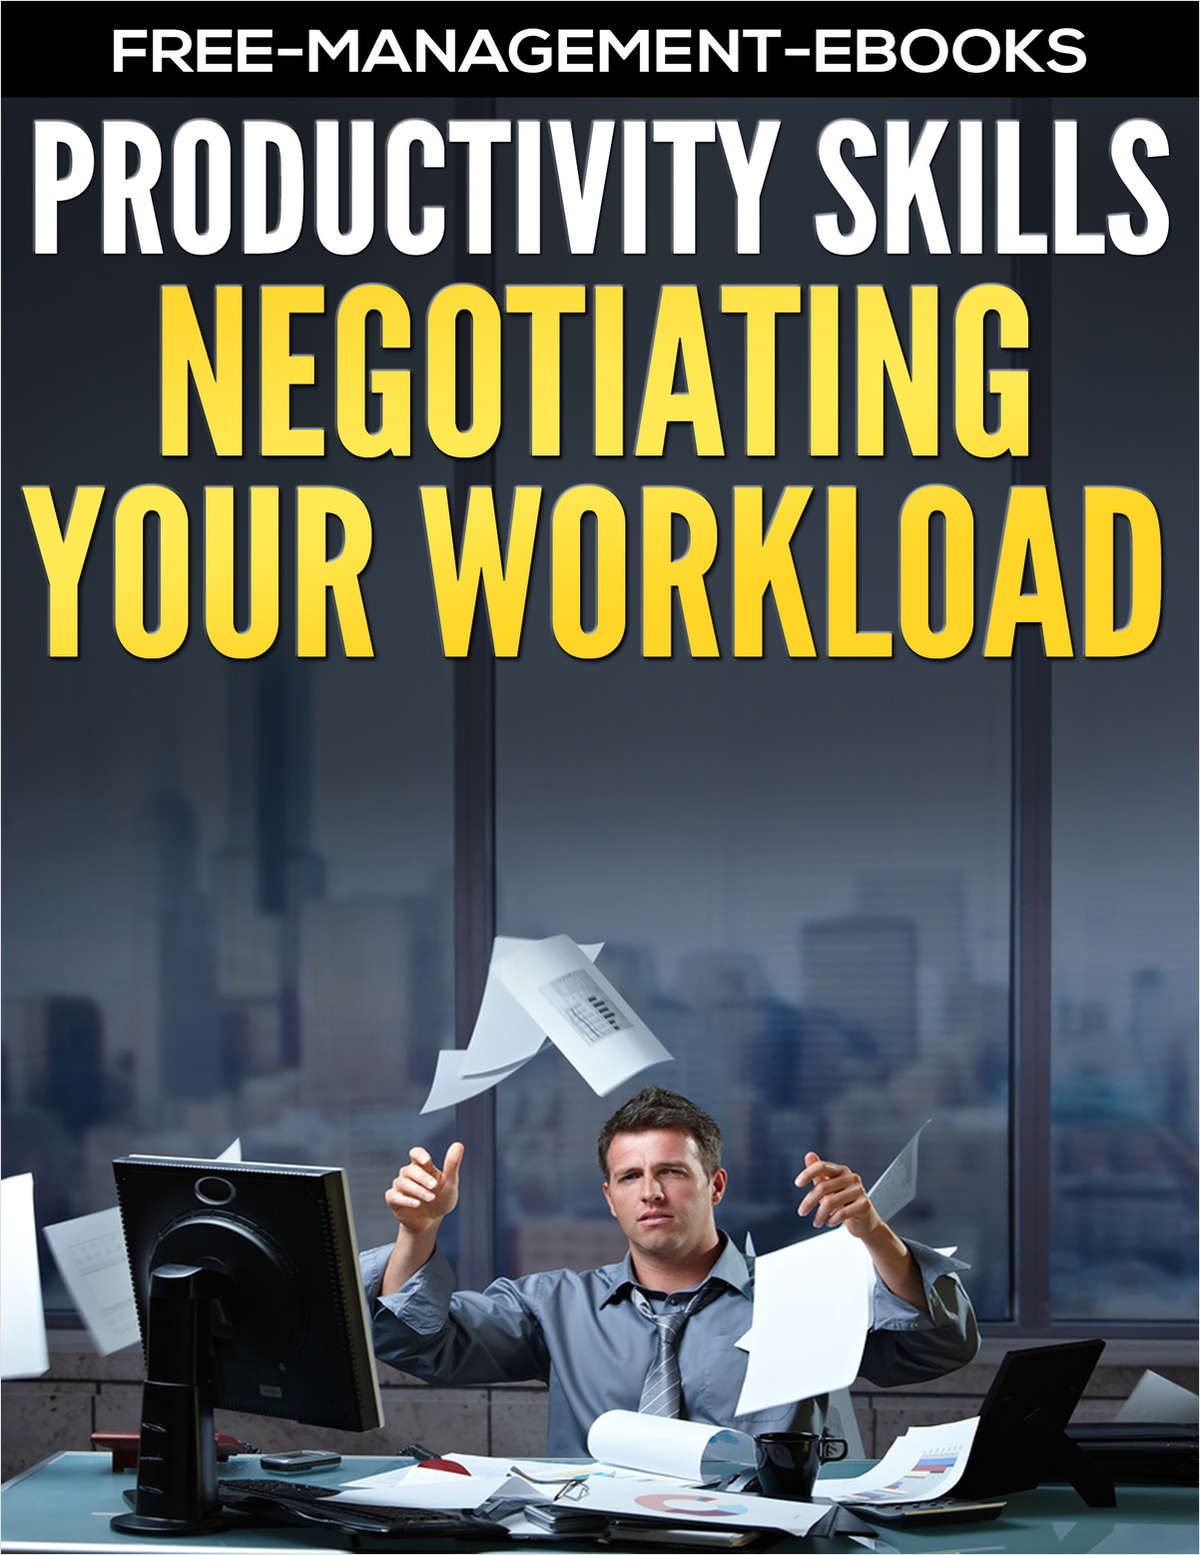 Negotiating Your Workload - Developing Your Productivity Skills